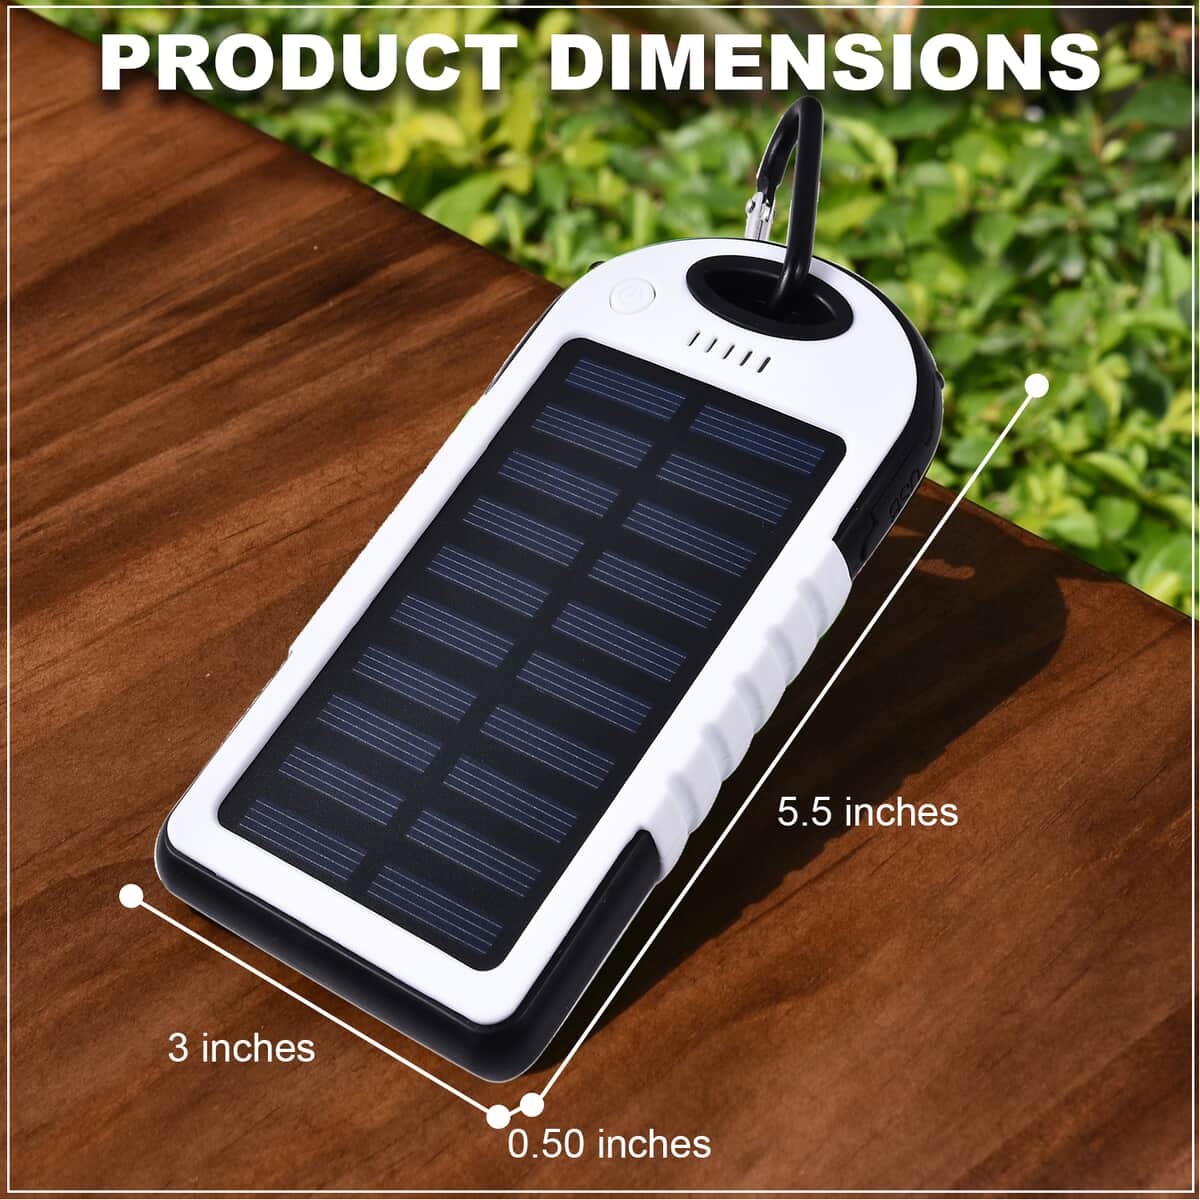 HOMESMART White Carabiner Solar 5000 mAh Battery Charger with USB & Emergency LED Torch image number 3